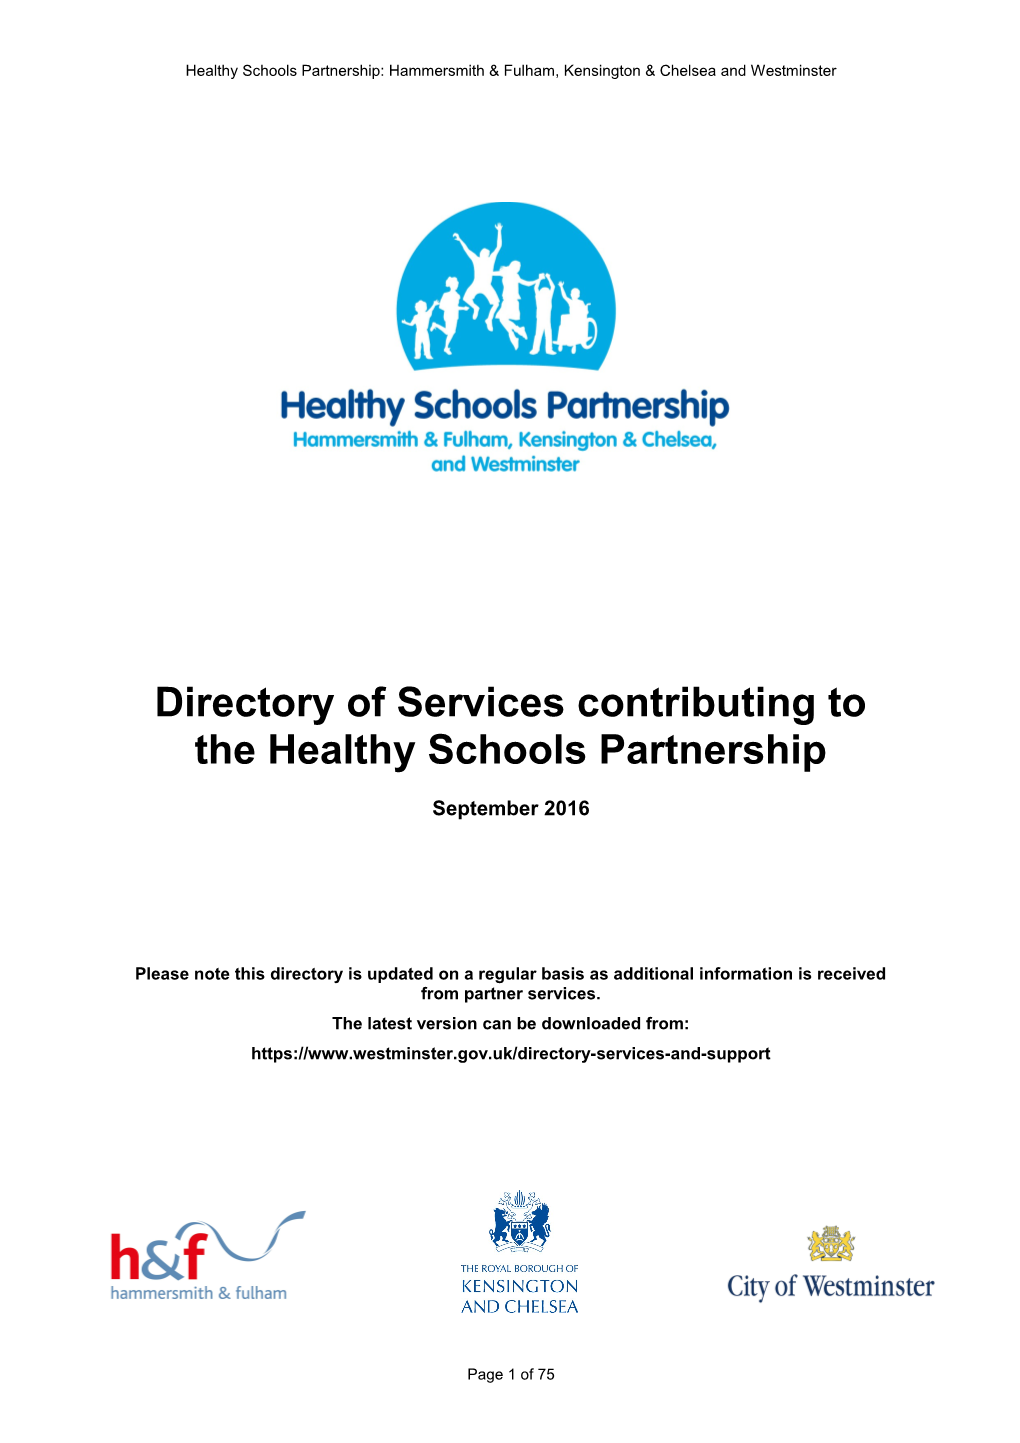 Directory of Services Contributing to the Healthy Schools Partnership